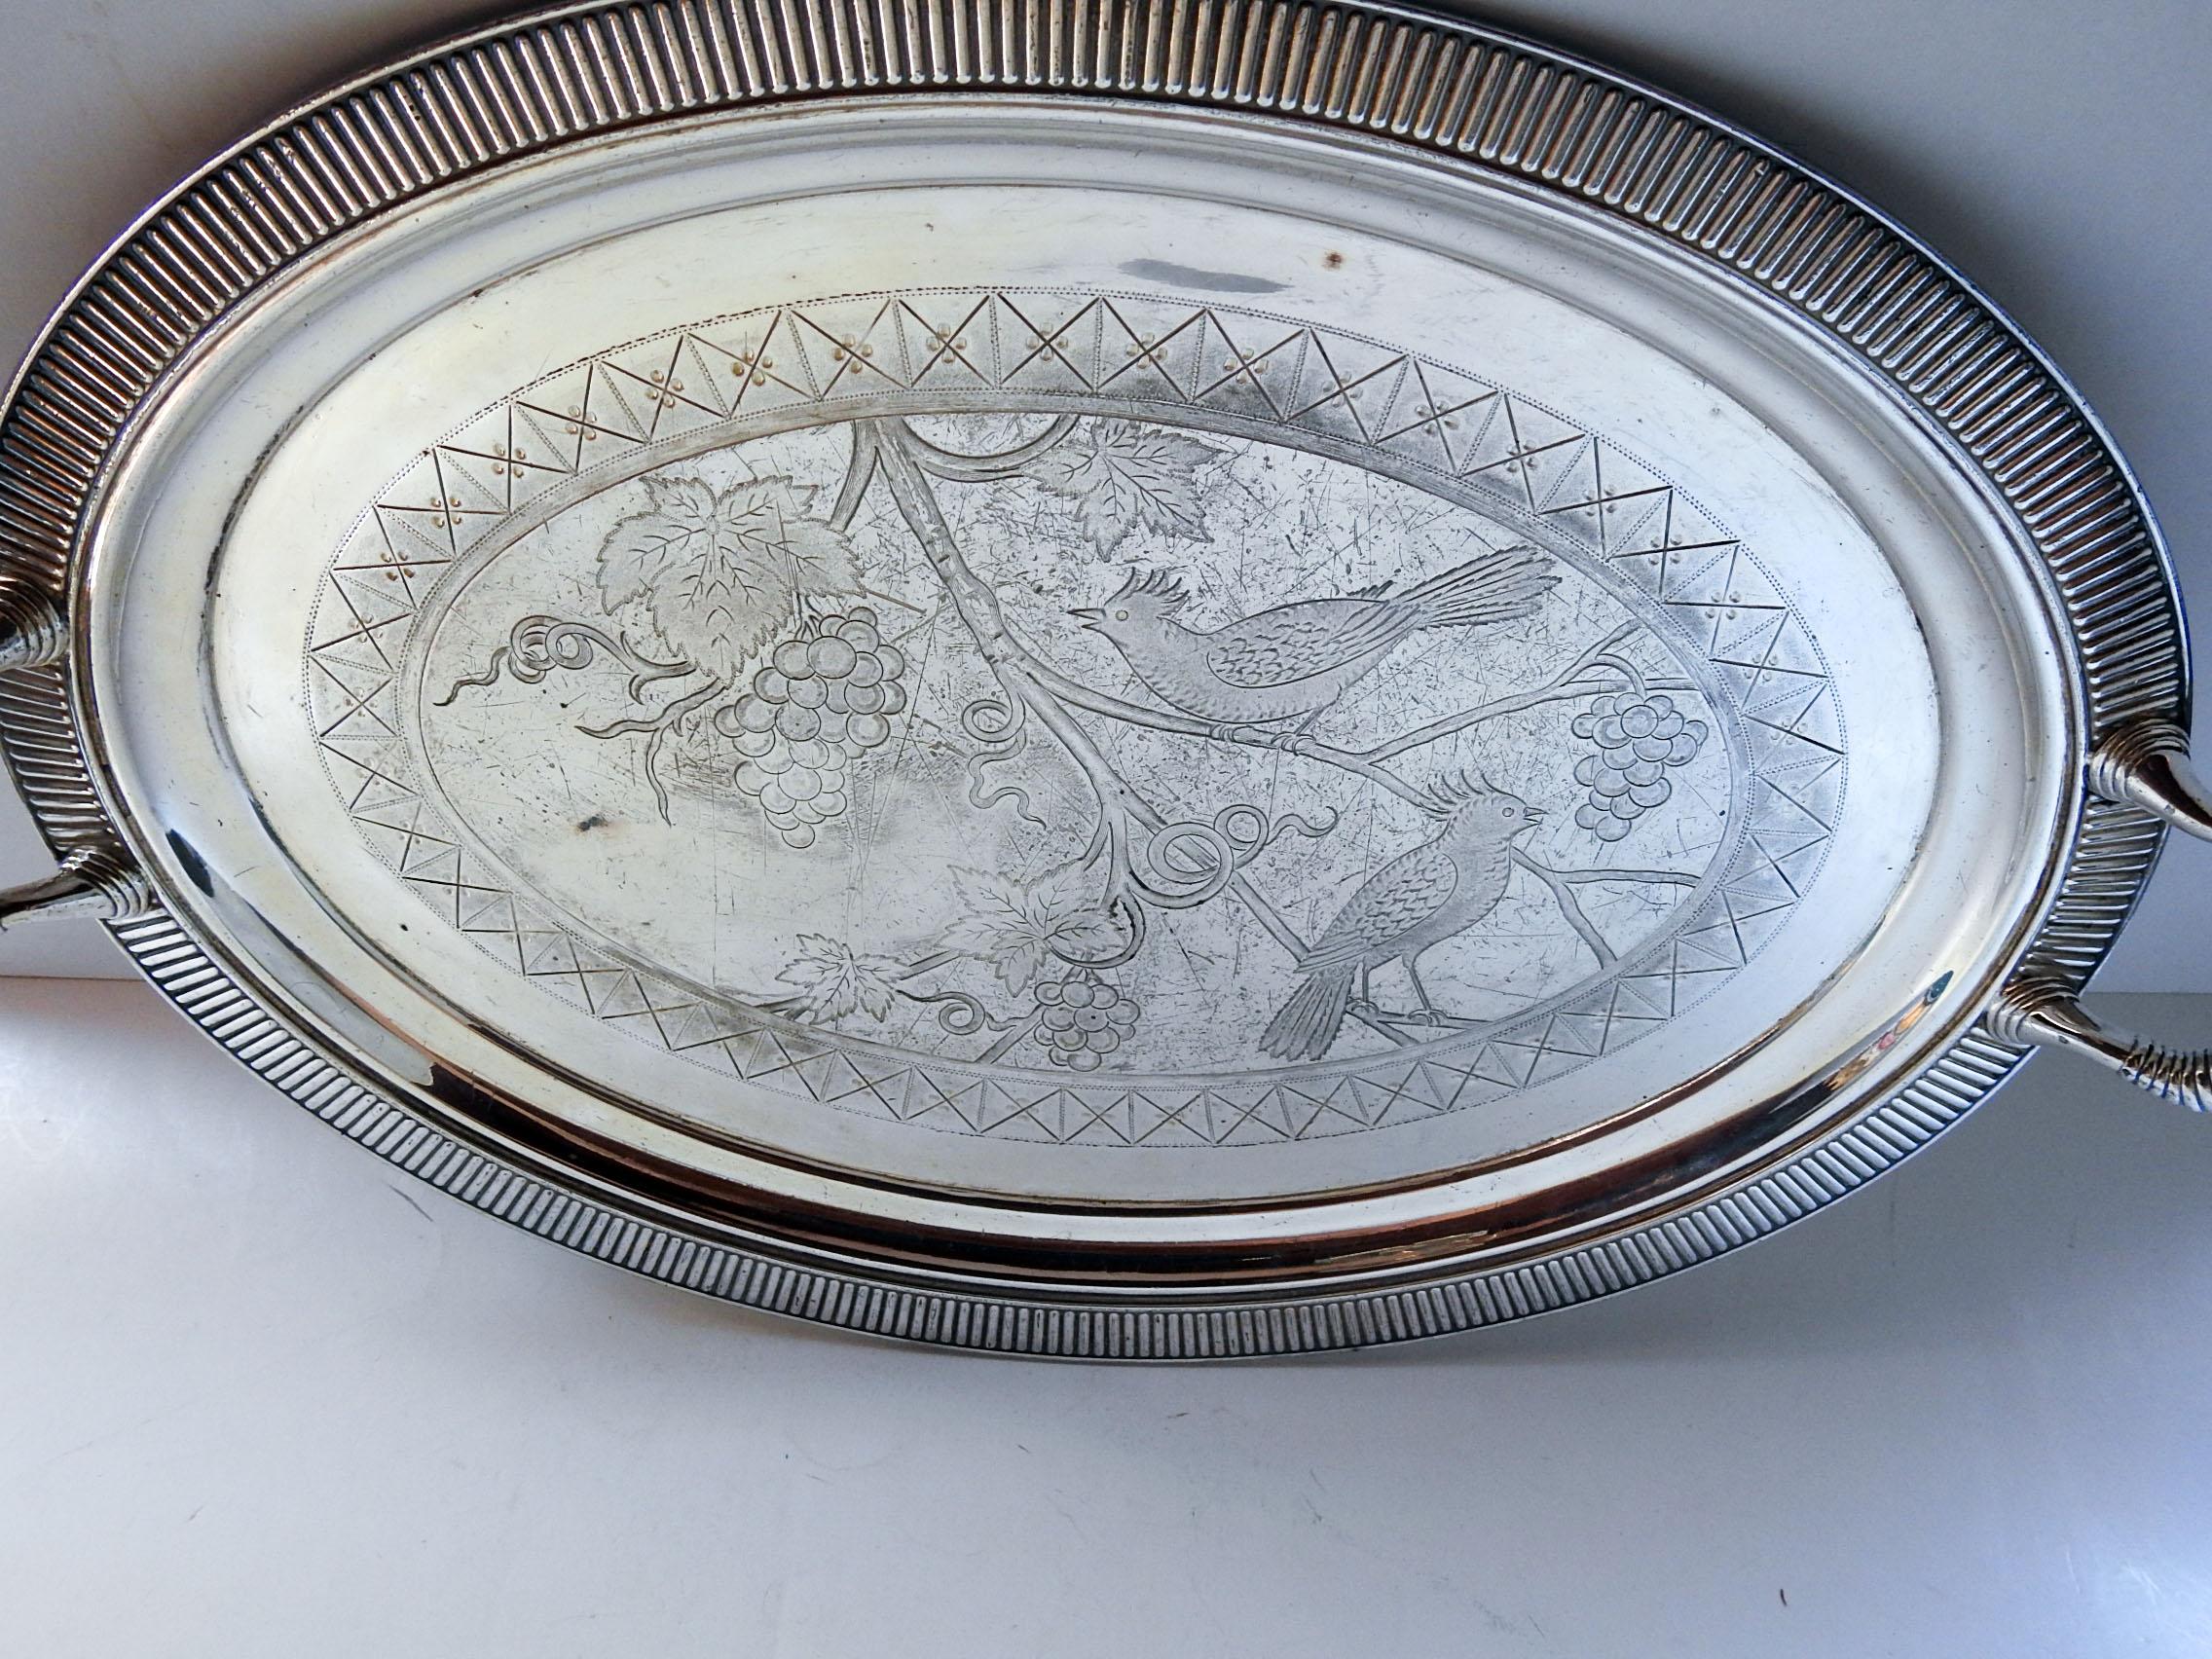 Circa 1880's Simpson, Hall & Miller Co. silver plate serving tray. Aesthetic movement engraved design with birds and grapes. Marked on back, surface scratches.